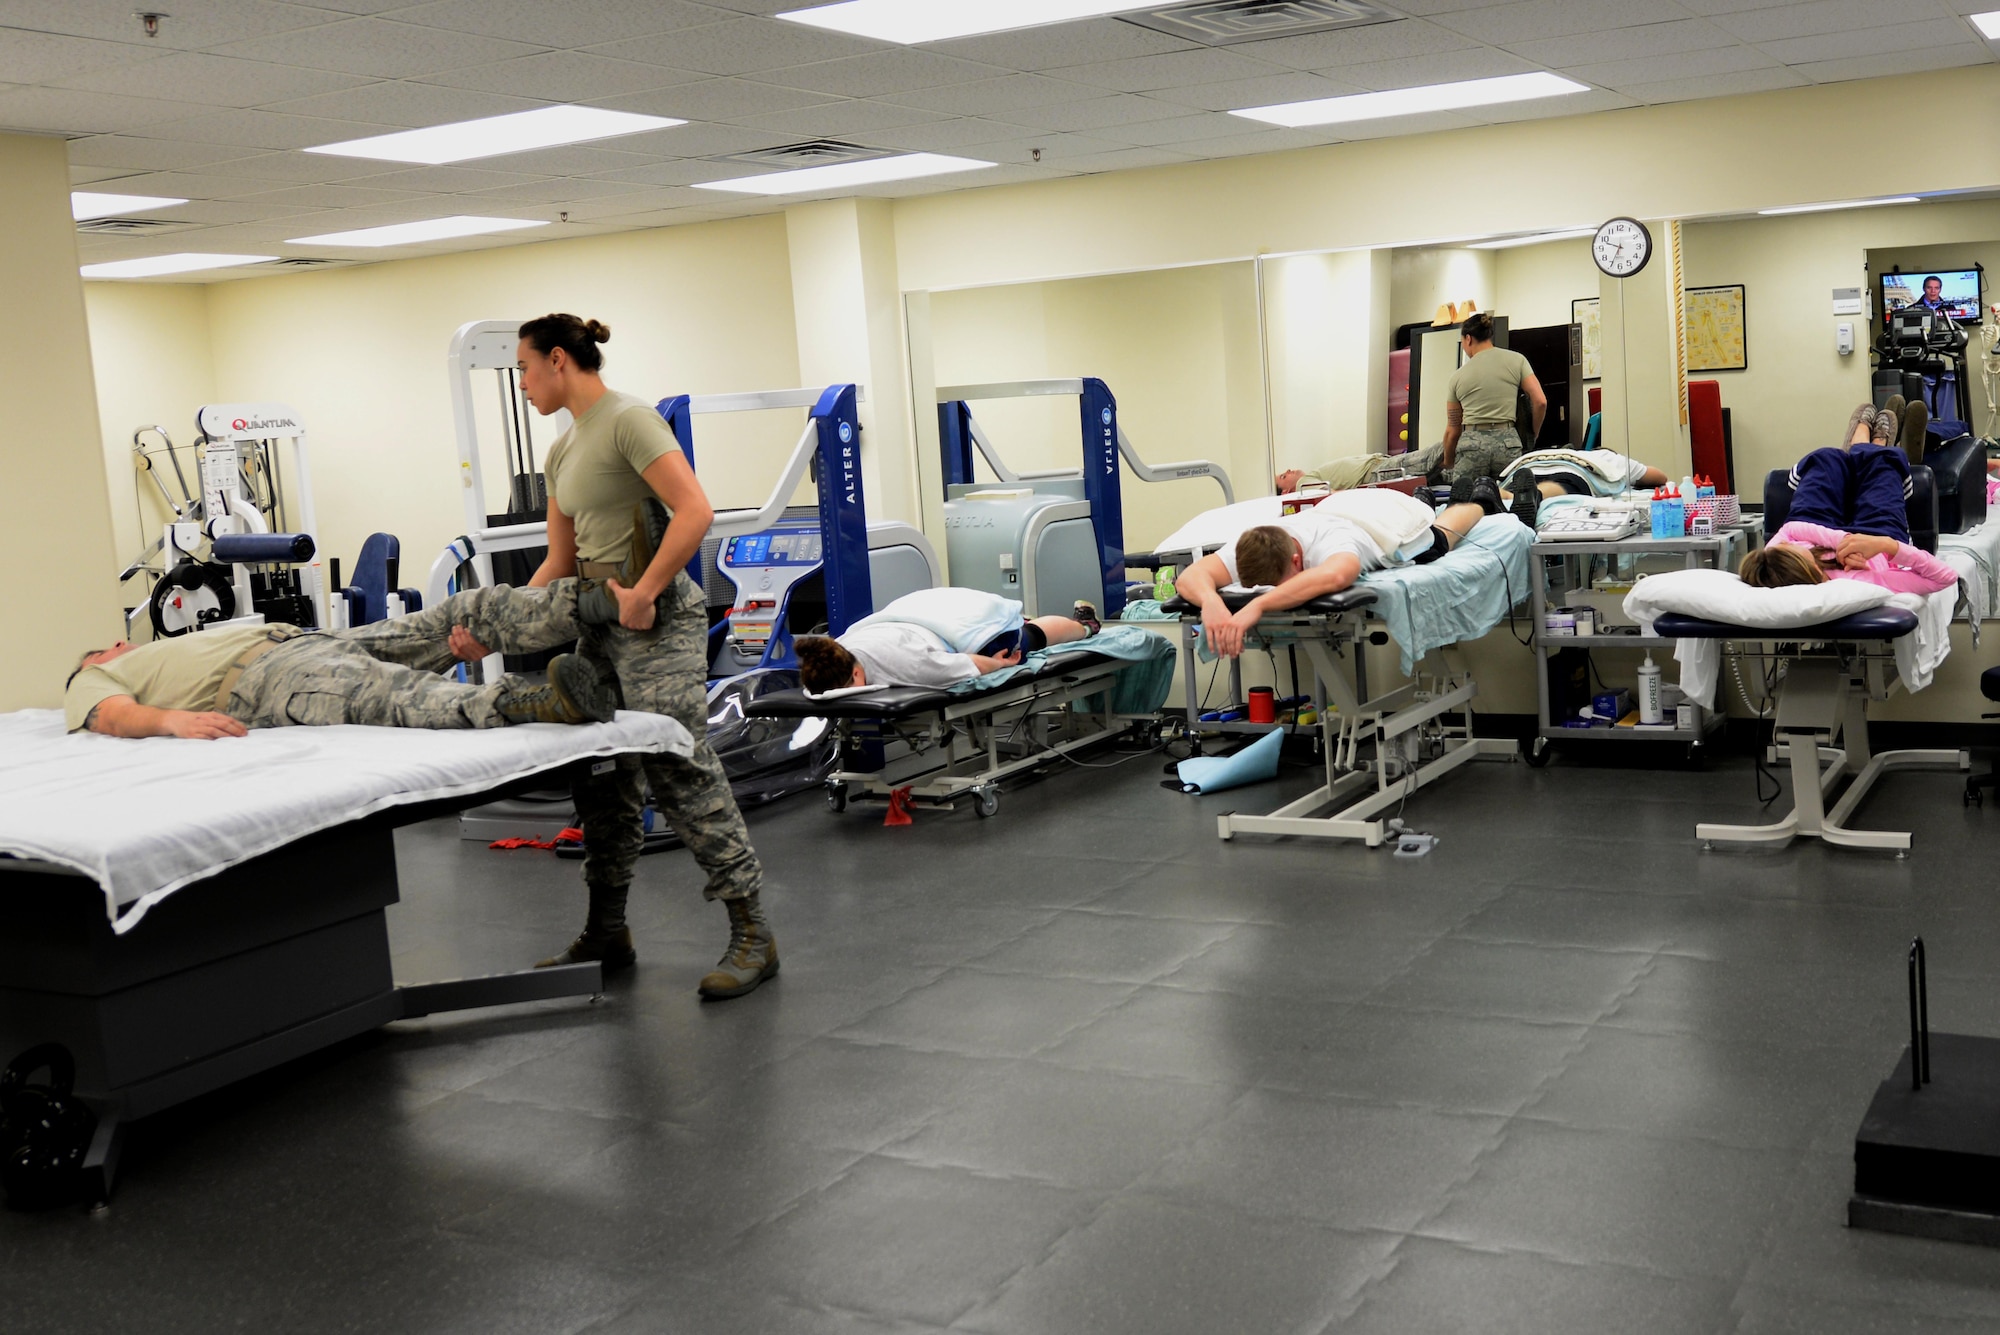 Staff Sgt. Amber Coley, 4th Medical Operations Squadron physical therapy technician, provides assistance to several patients, Nov. 18, 2015, in the physical therapy clinic at Seymour Johnson Air Force Base, North Carolina. Team Seymour’s physical therapists see more than 100 patients per week, instructing them on different exercises to rehabilitate their injuries. (U.S. Air Force photo/Airman 1st Class Ashley Williamson)